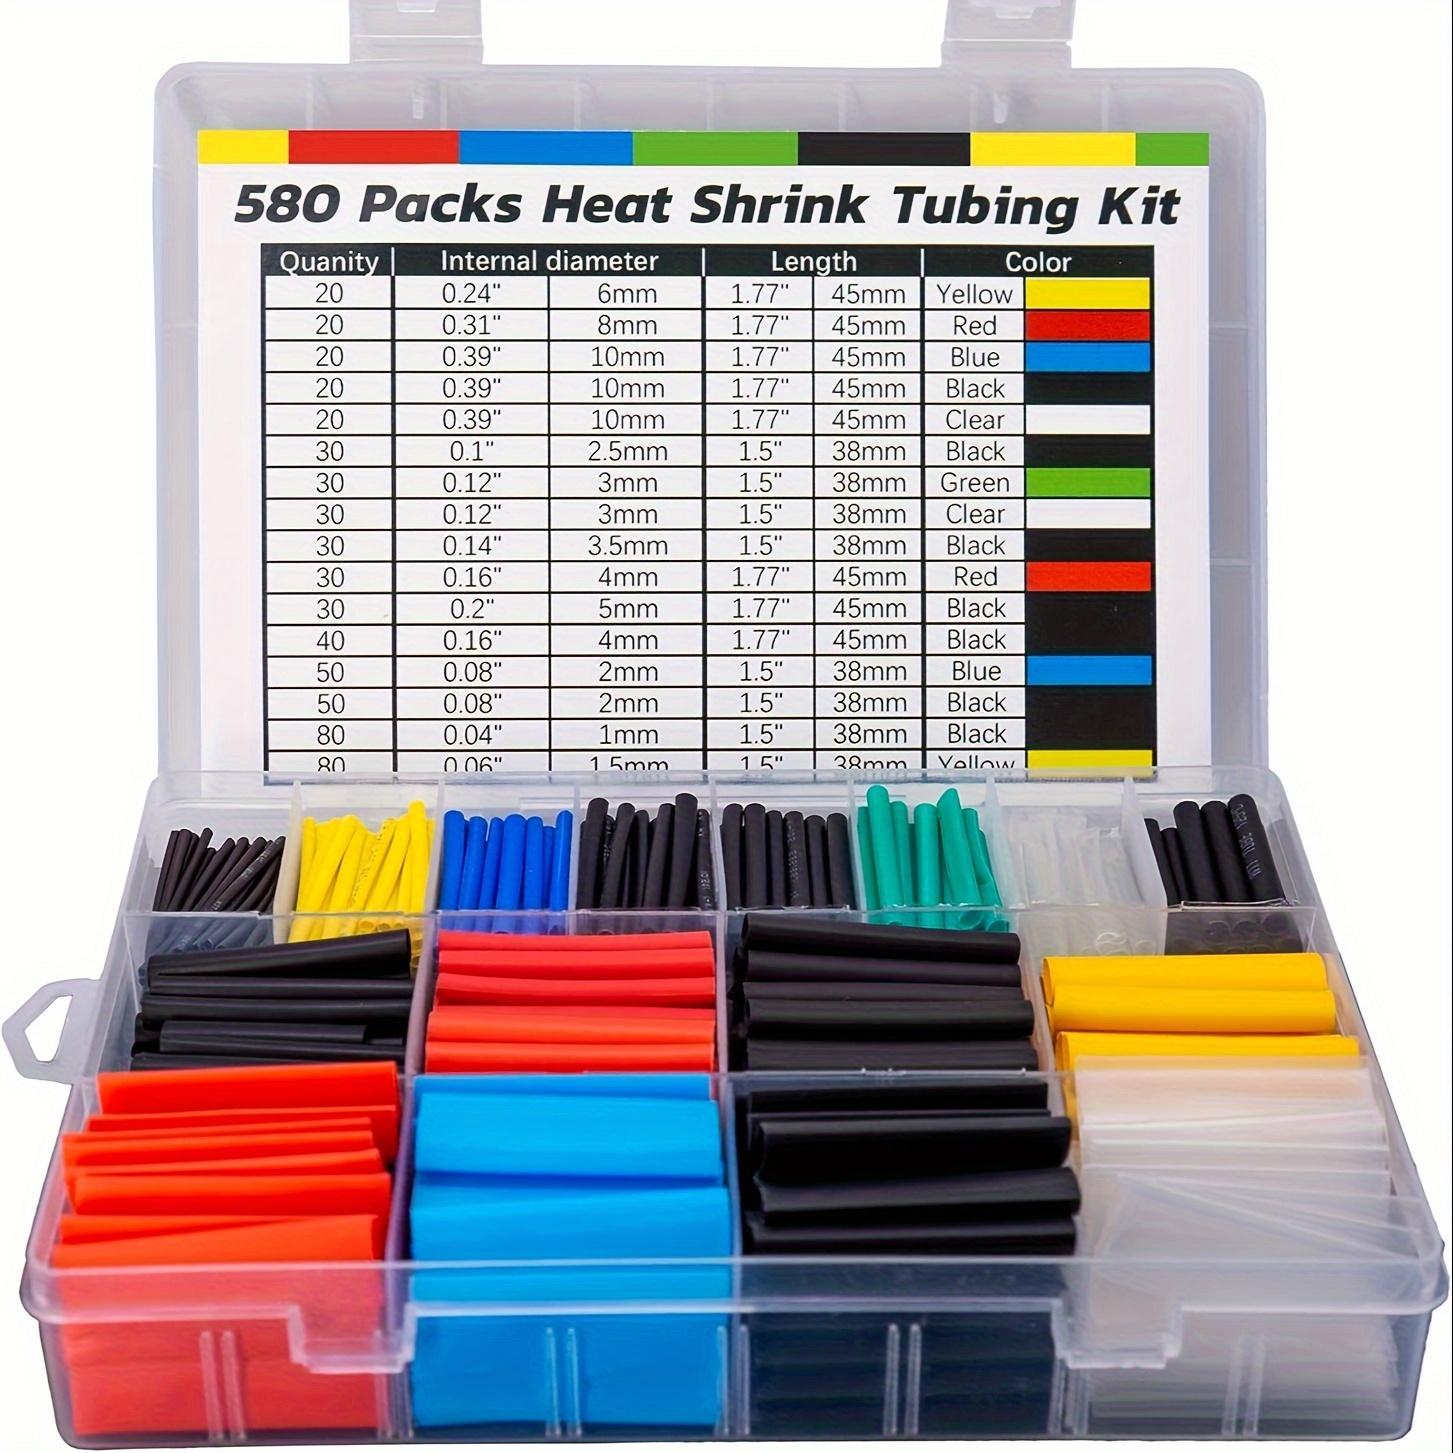 

Heat Shrink Tubing Kit - 580pcs Eva Material In 6 Colors And 11 Sizes - Ideal For Electrical Insulation, Repairs, And Wire Connectors With User-friendly Design And Storage Case